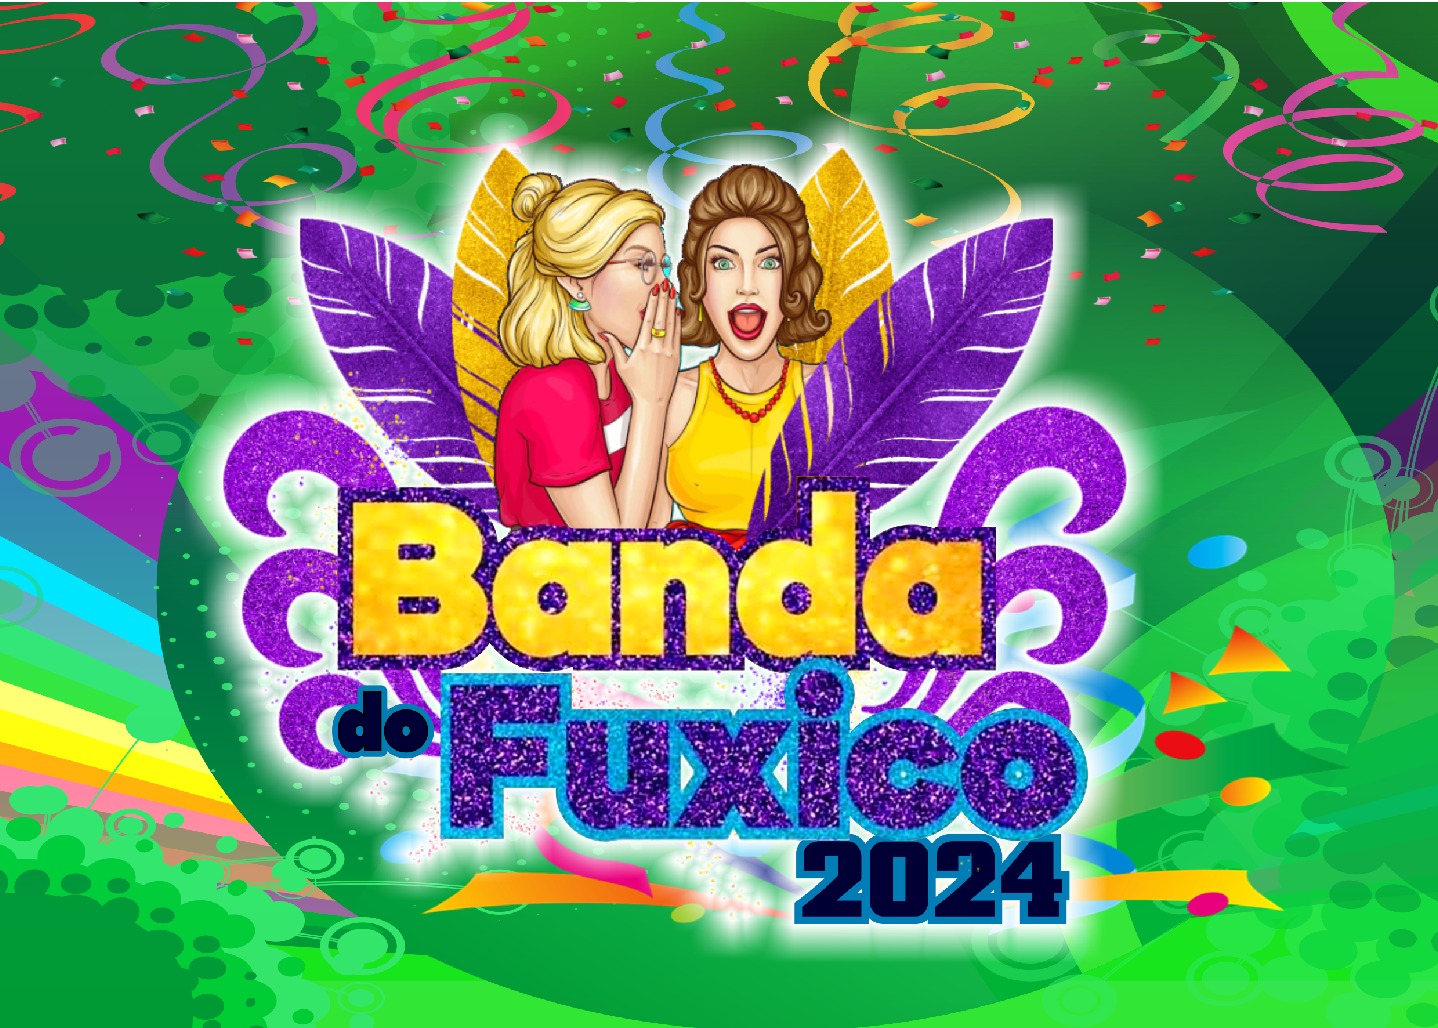 Banda do Fuxico brings together programming for the community in the West Zone of Manaus